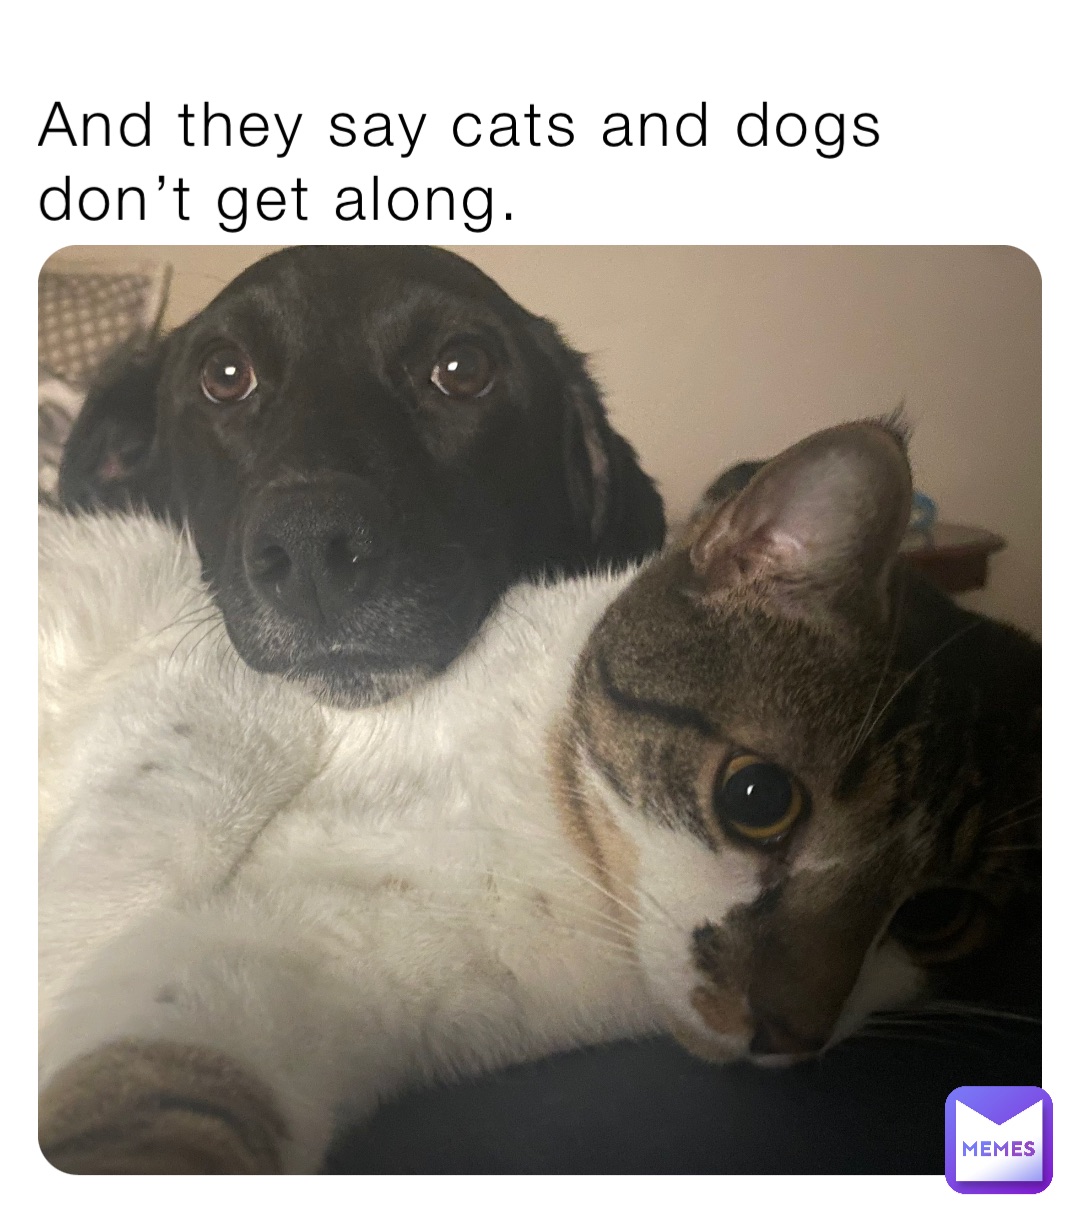 And they say cats and dogs don’t get along.